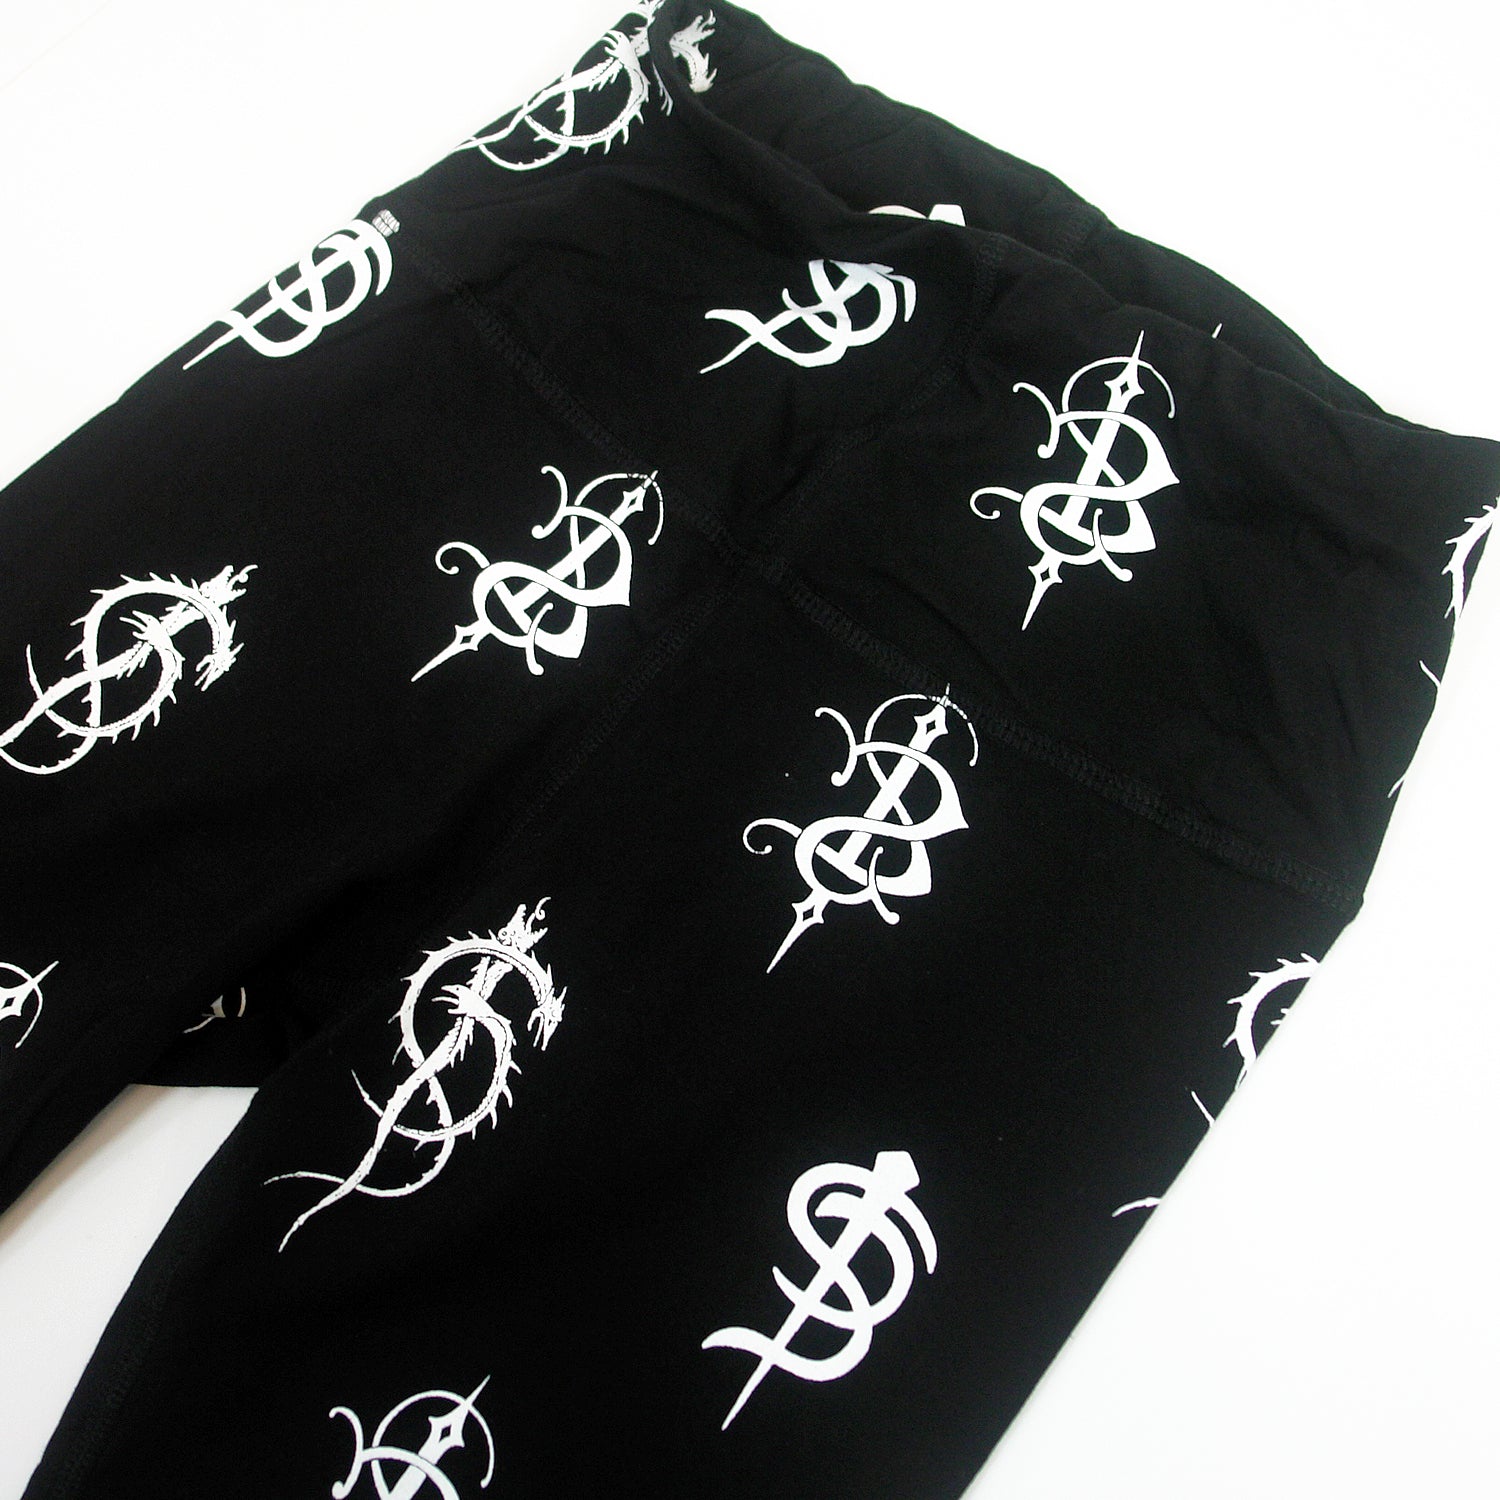 close up image of black leggings on a white background. leggings have white printed skinny puppy logos repeated all over